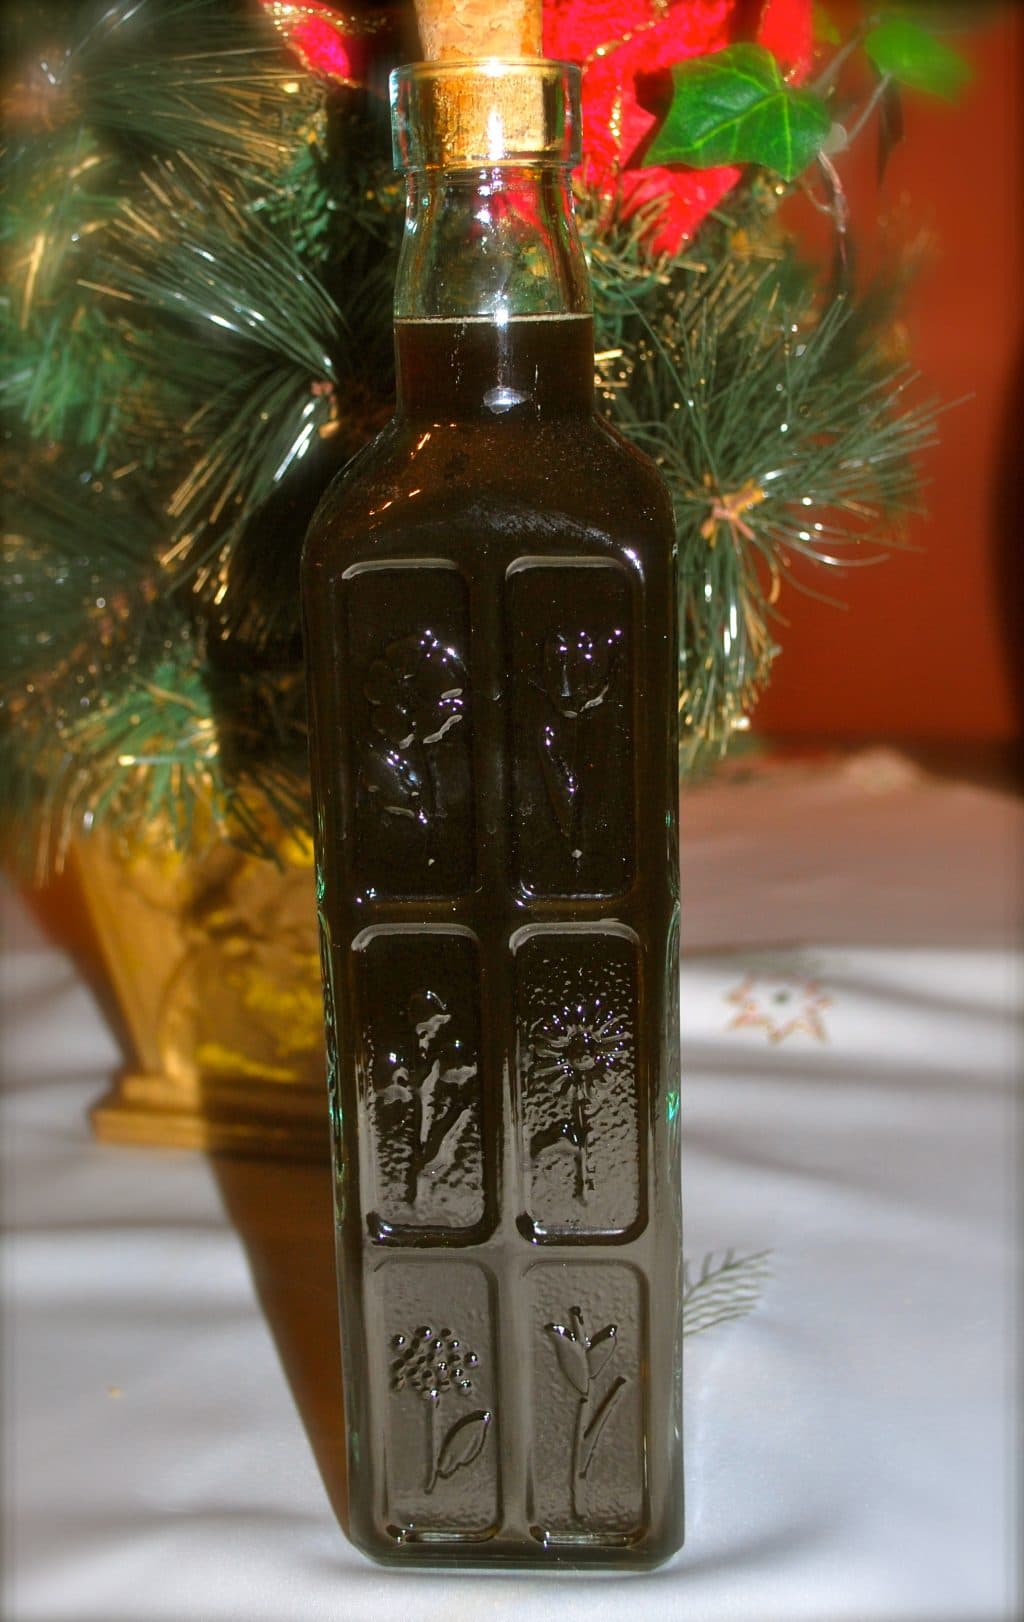 A close up of a bottle with kahlua